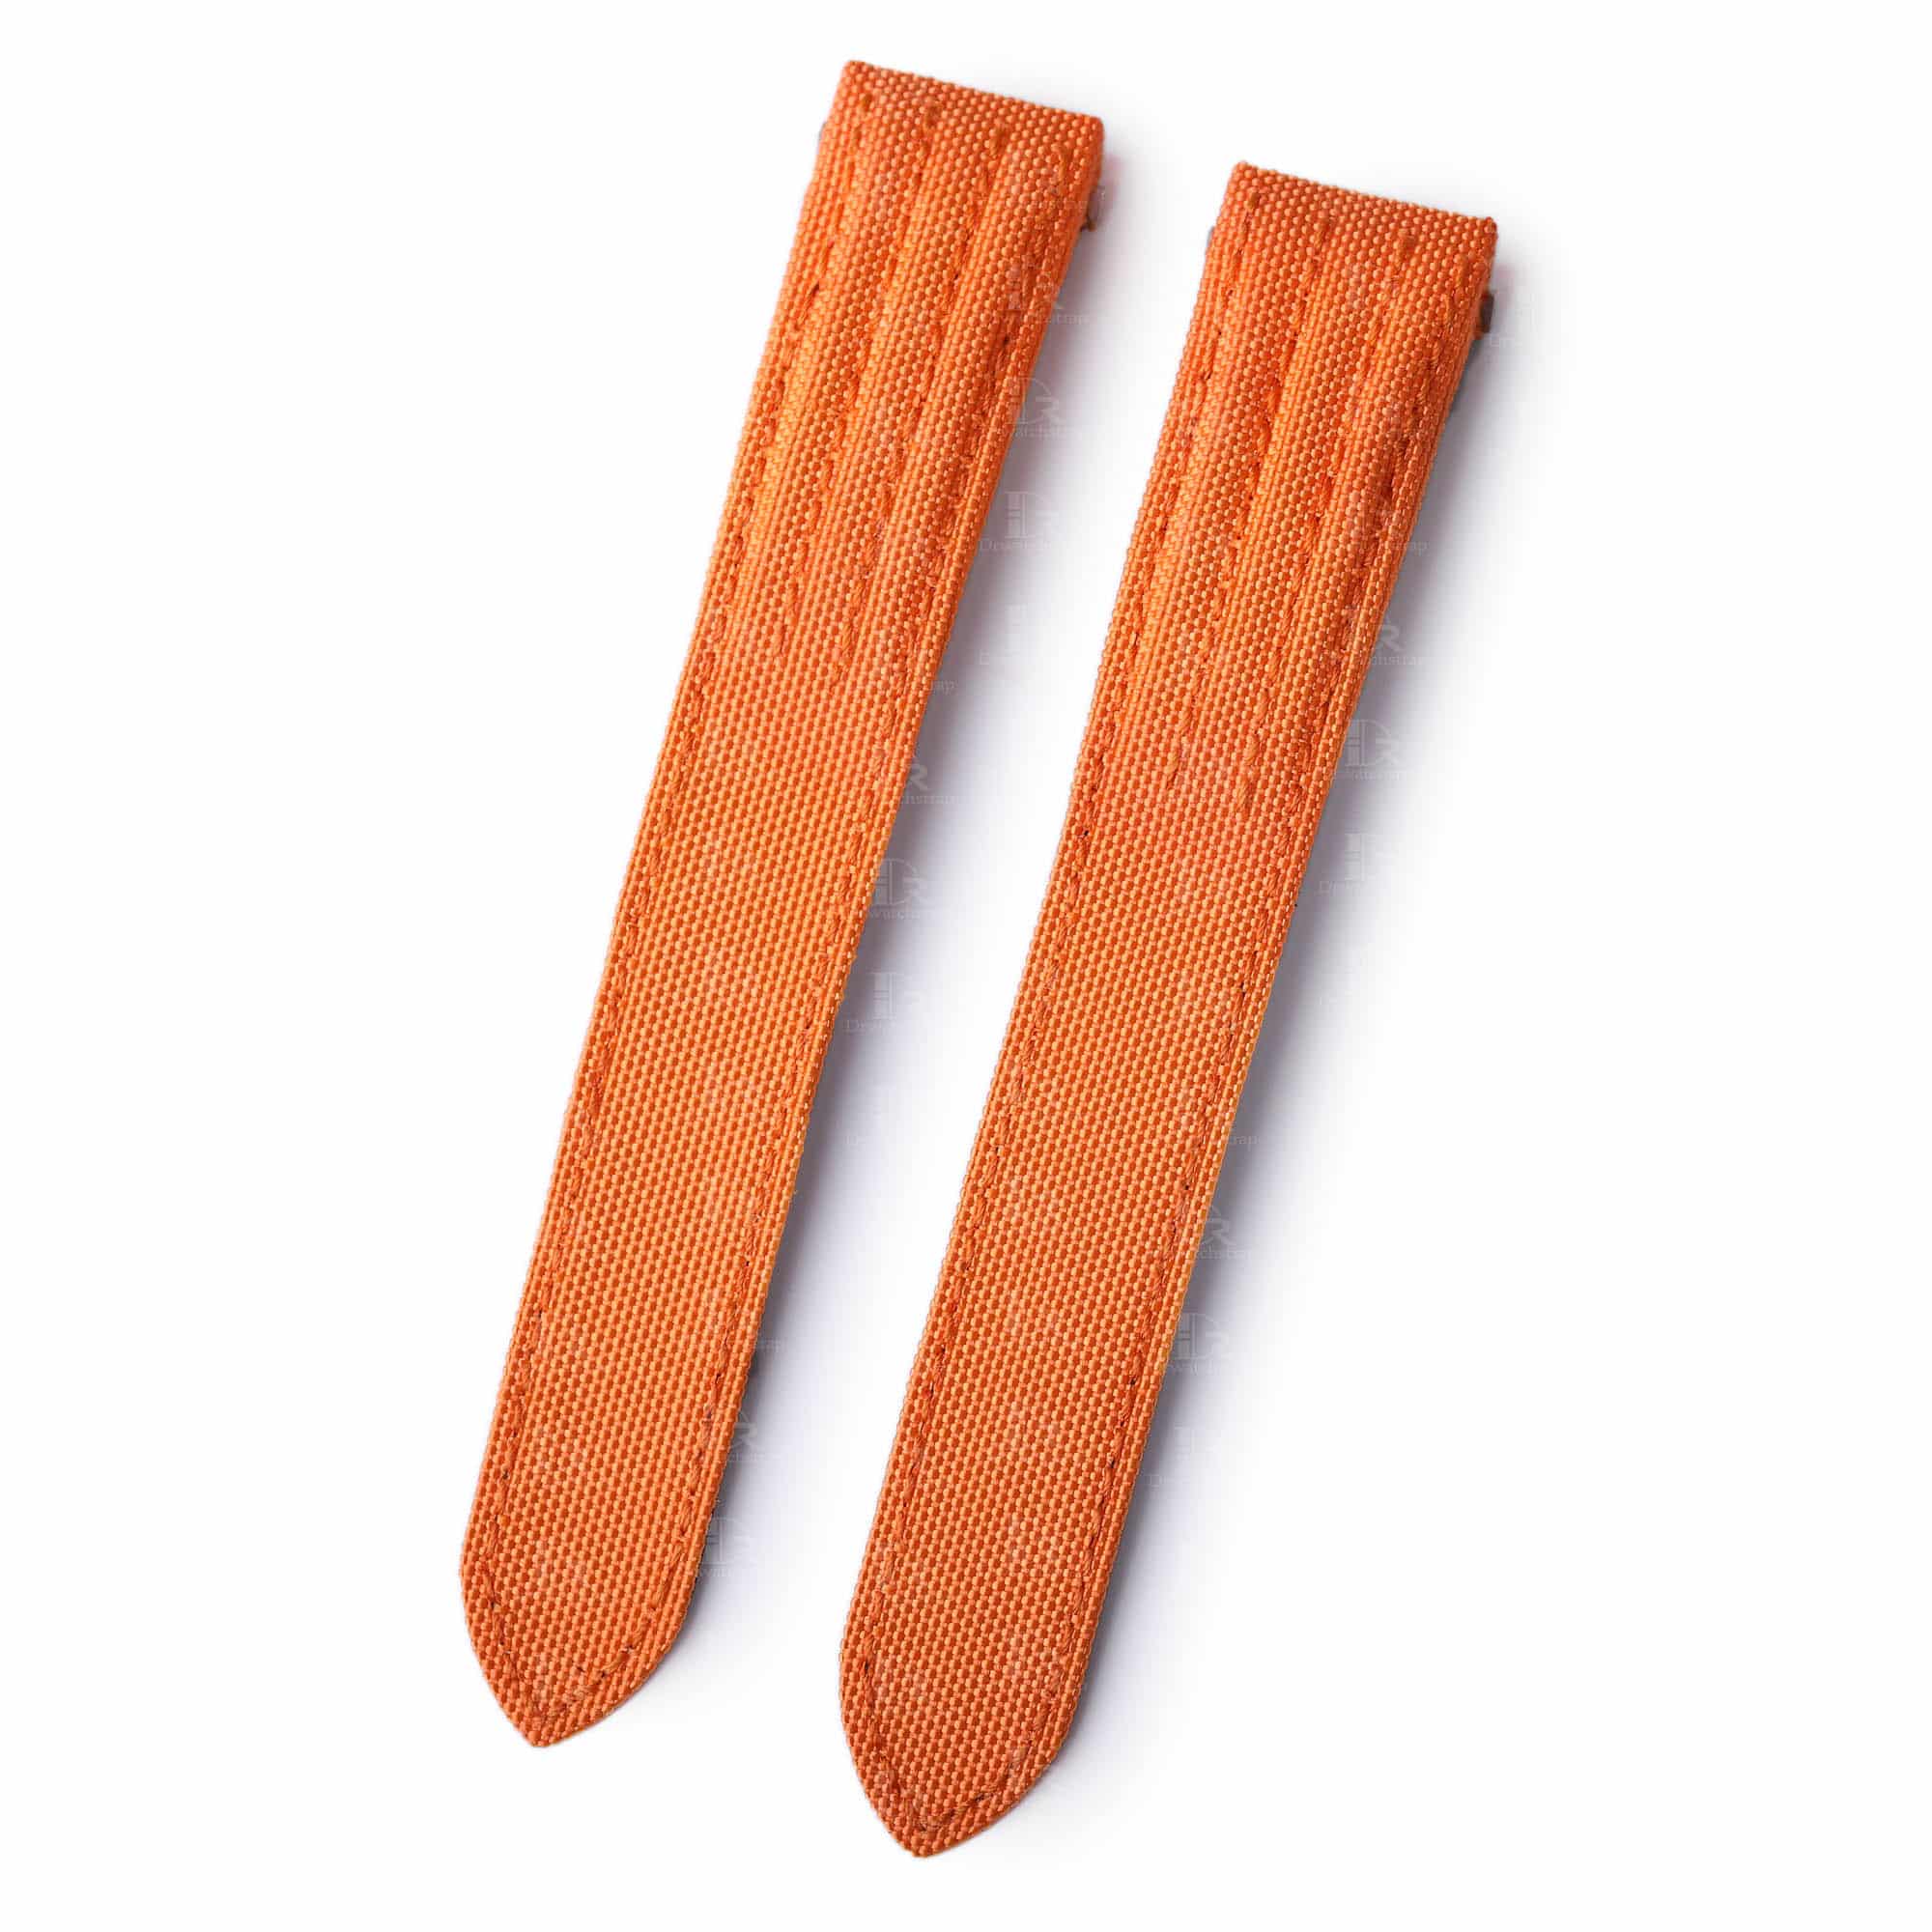 Custom Orange watch band with the high-quality nylon kevlar material